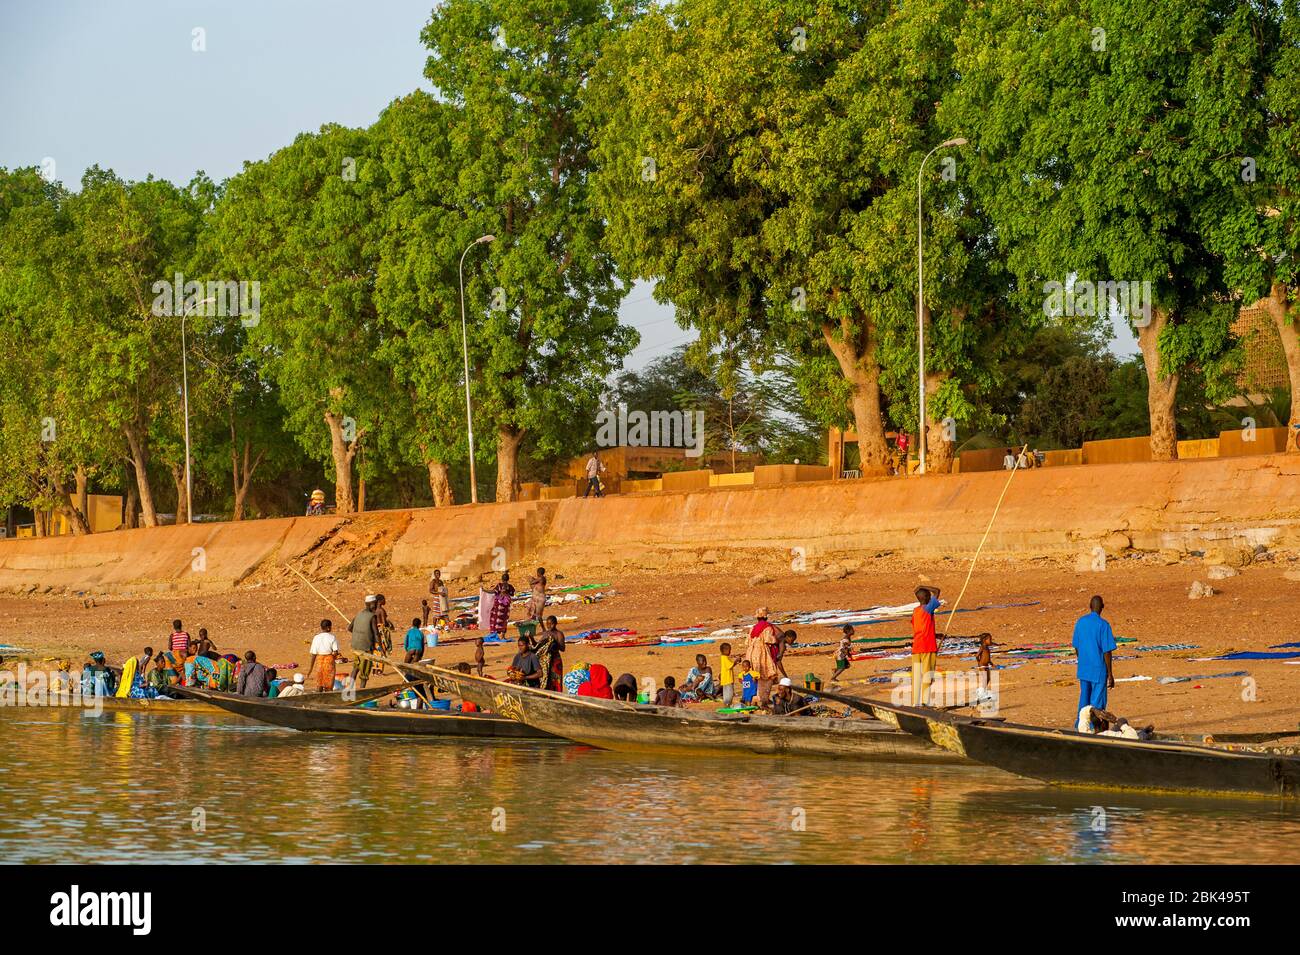 Local people traveling in wooden boats on the Bani River in Mopti in Mali, West Africa. Stock Photo